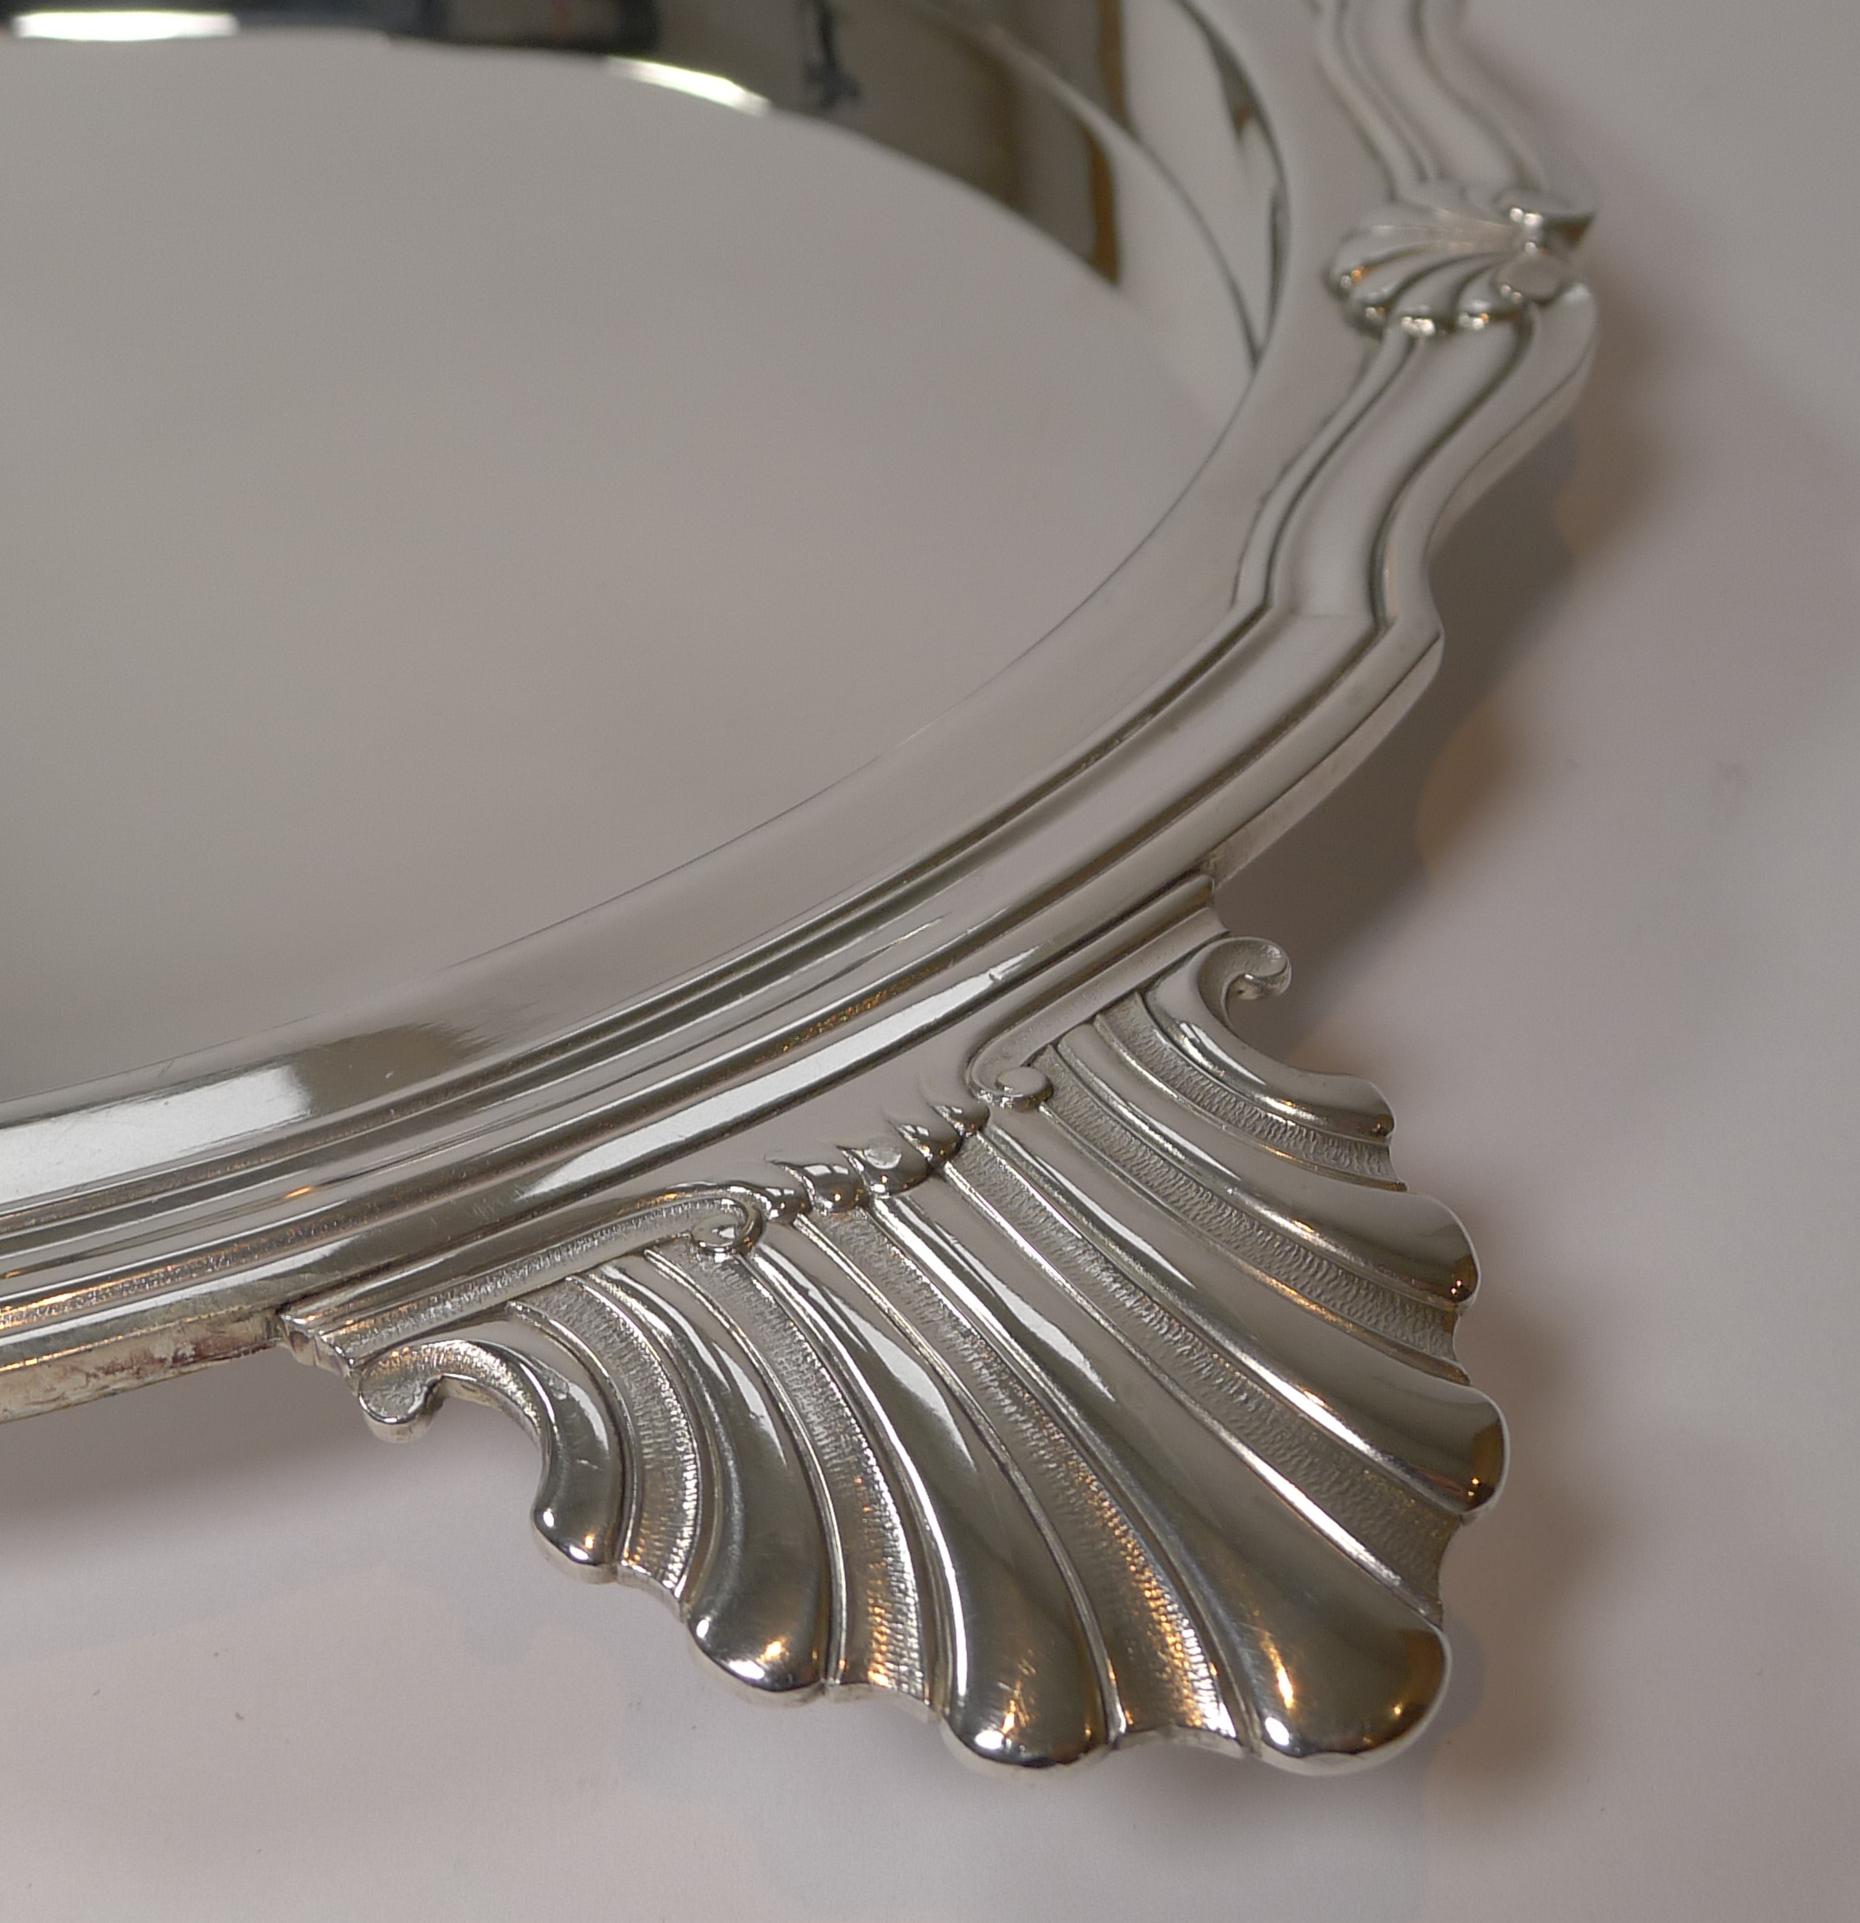 A magnificent and very stylish tray by the master craftsman, Victor Saglier. French in origin dating to circa 1900, the tray is silver plated having just been professionally cleaned and polished by our silversmith.

The tray incorporates two very